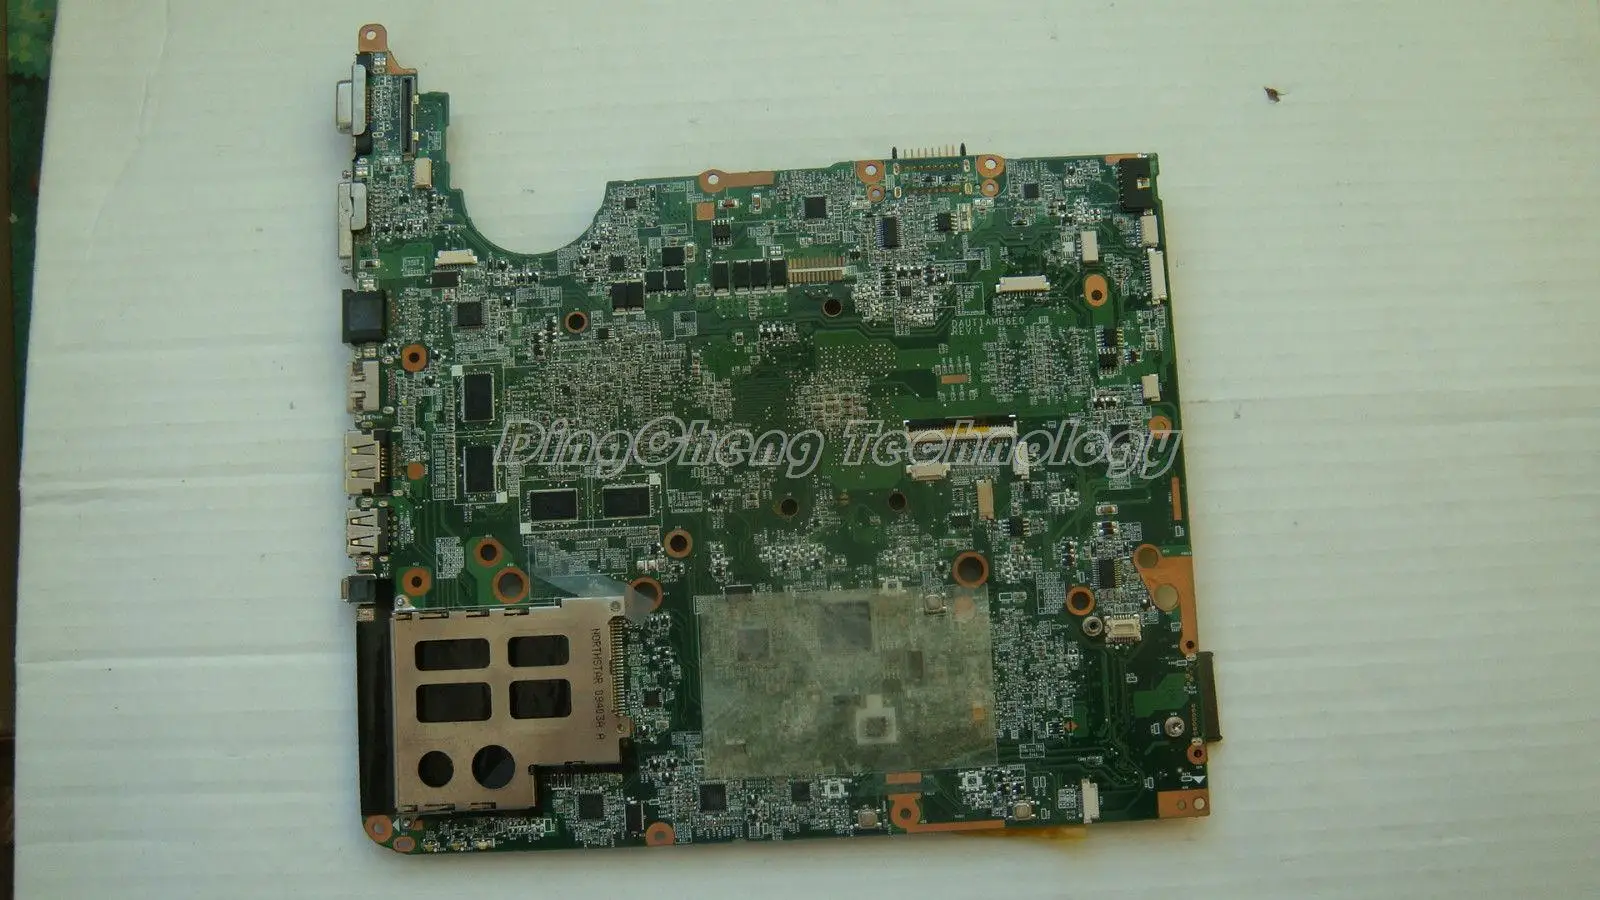 70% OFF  Laptop Motherboard for hp DV7 DV7-3000 notebook mainboard 574680-001 HD 4650/1GB DDR2 DAUT1AMB6E0 1